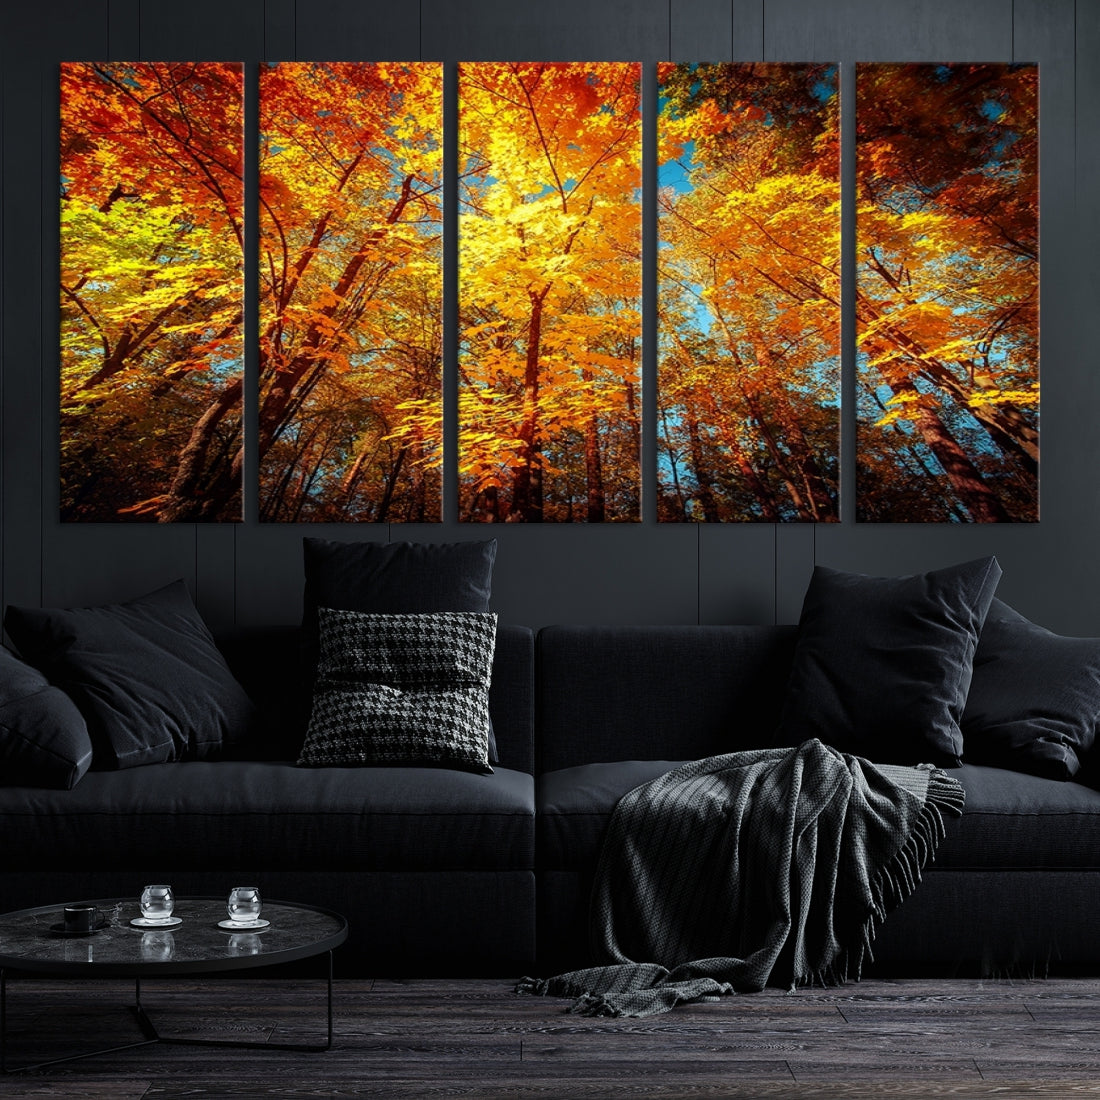 Forest View at Fall Large Wall Art Autumn Colors Landscape Canvas Print